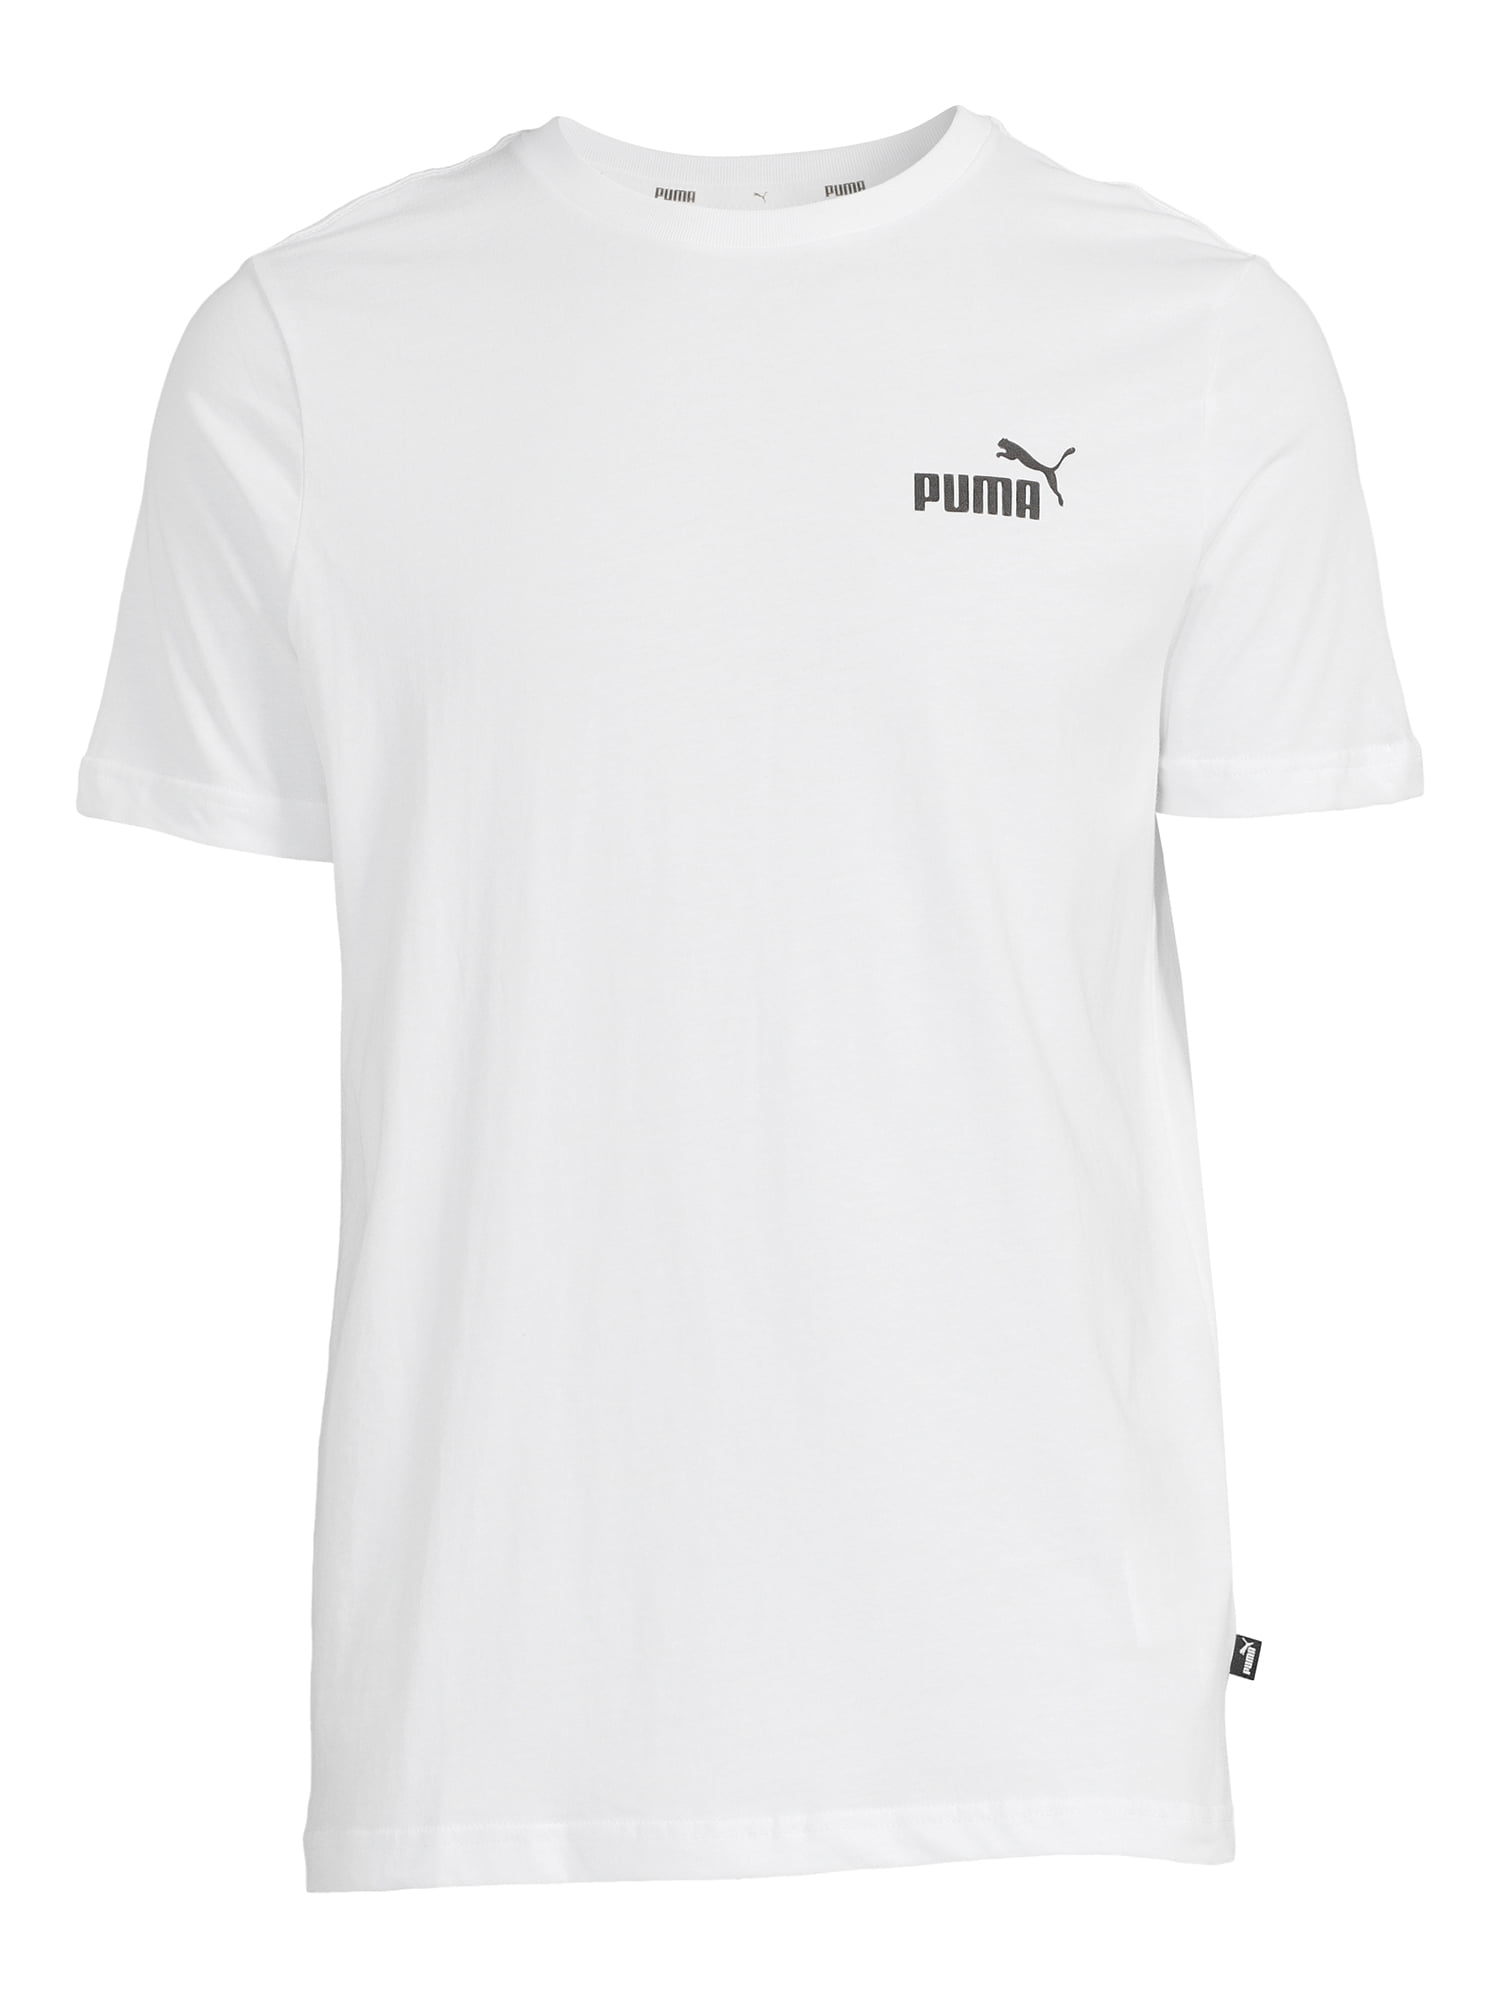 Chest sizes Men\'s Men\'s Shirt, PUMA Logo to S Essential and Tee 2XL Big